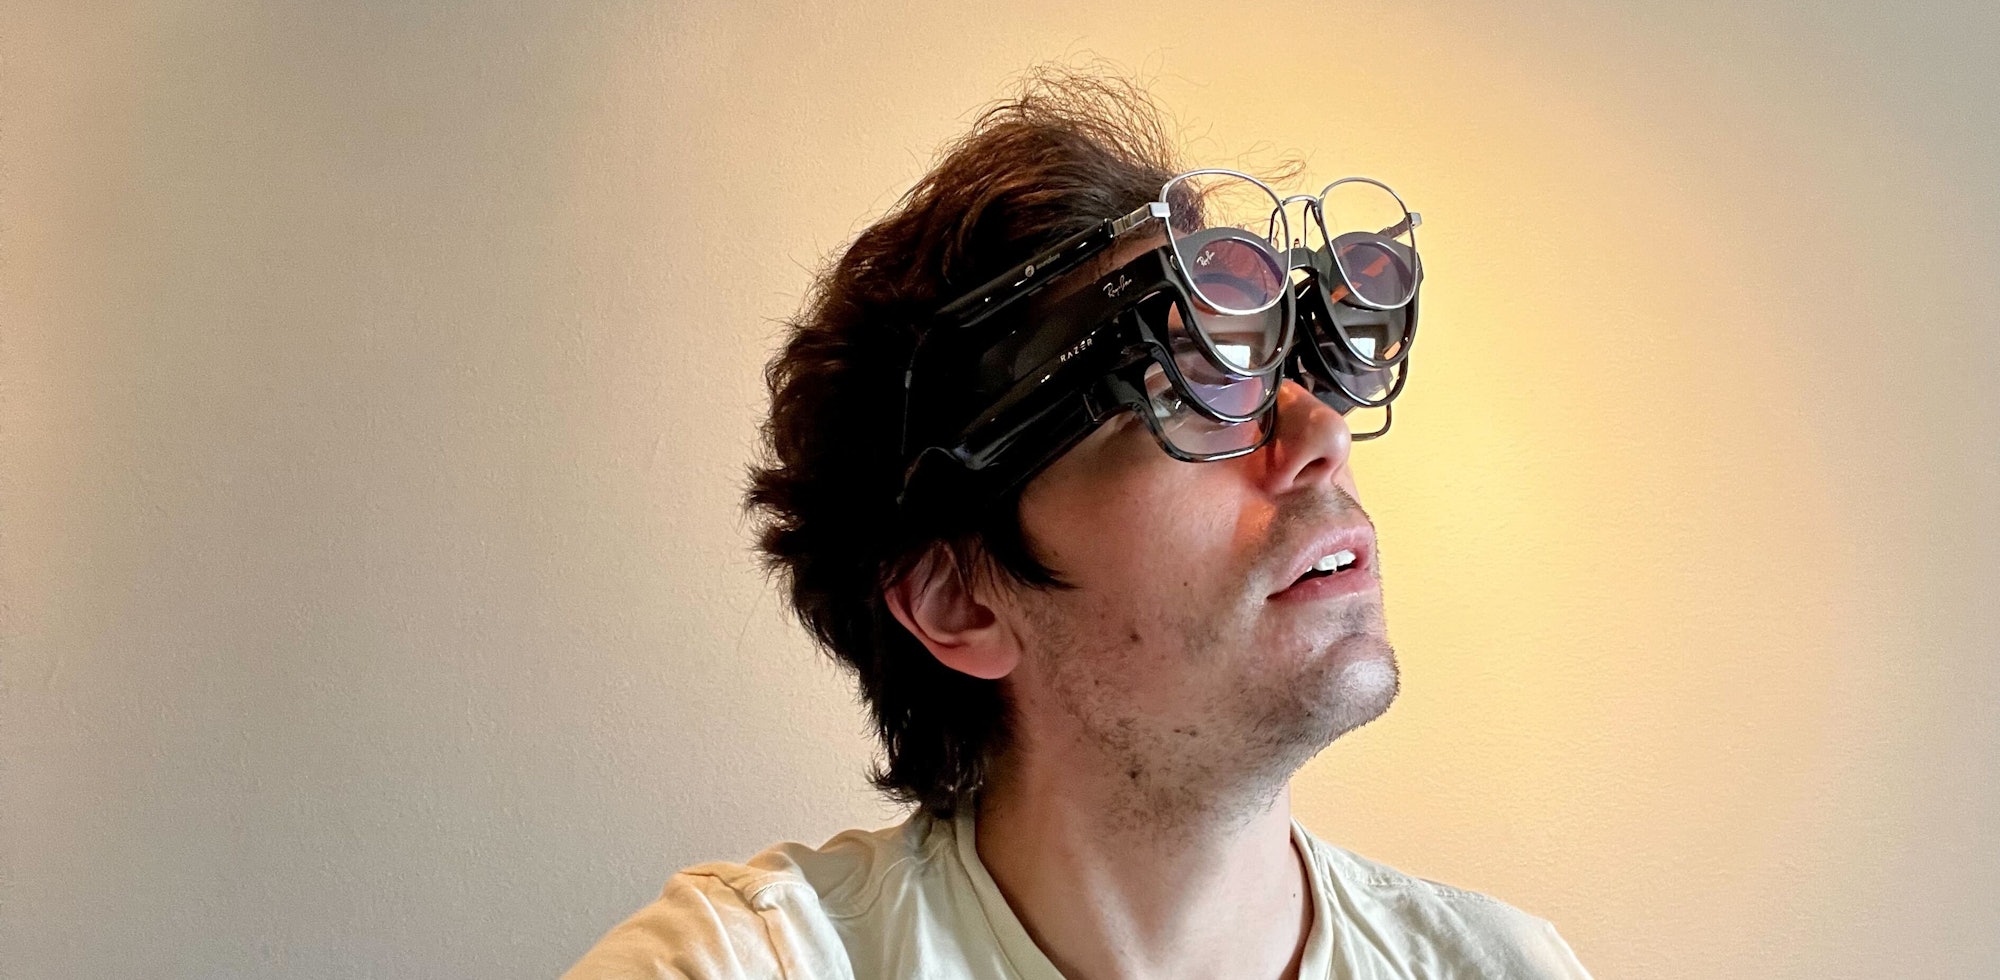 Ian wearing multiple pairs of smart glasses at once.